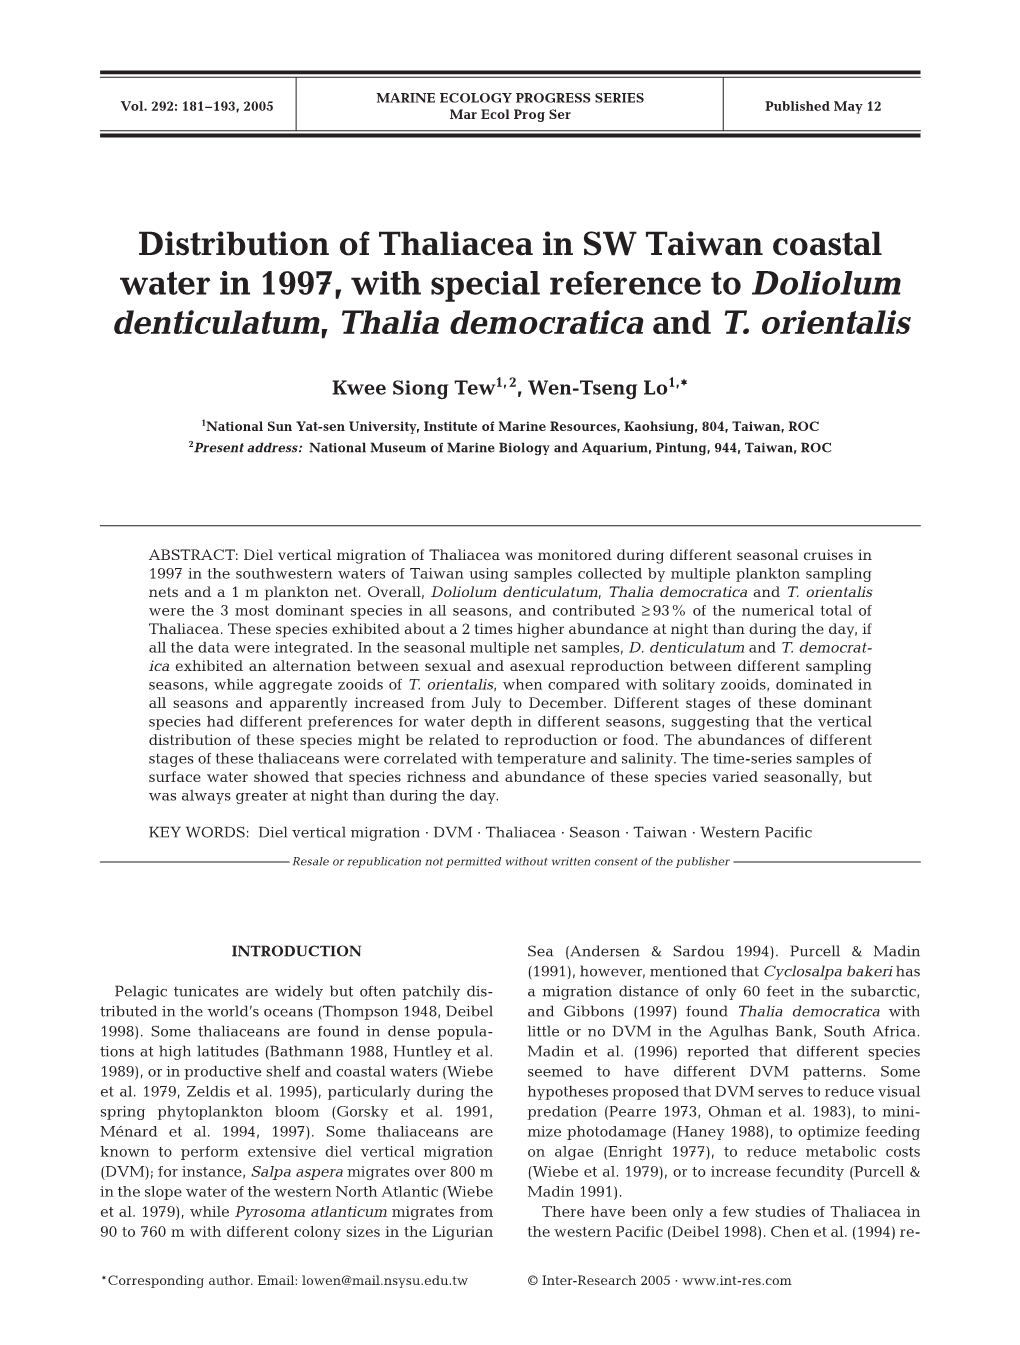 Distribution of Thaliacea in SW Taiwan Coastal Water in 1997, with Special Reference to Doliolum Denticulatum, Thalia Democratica and T